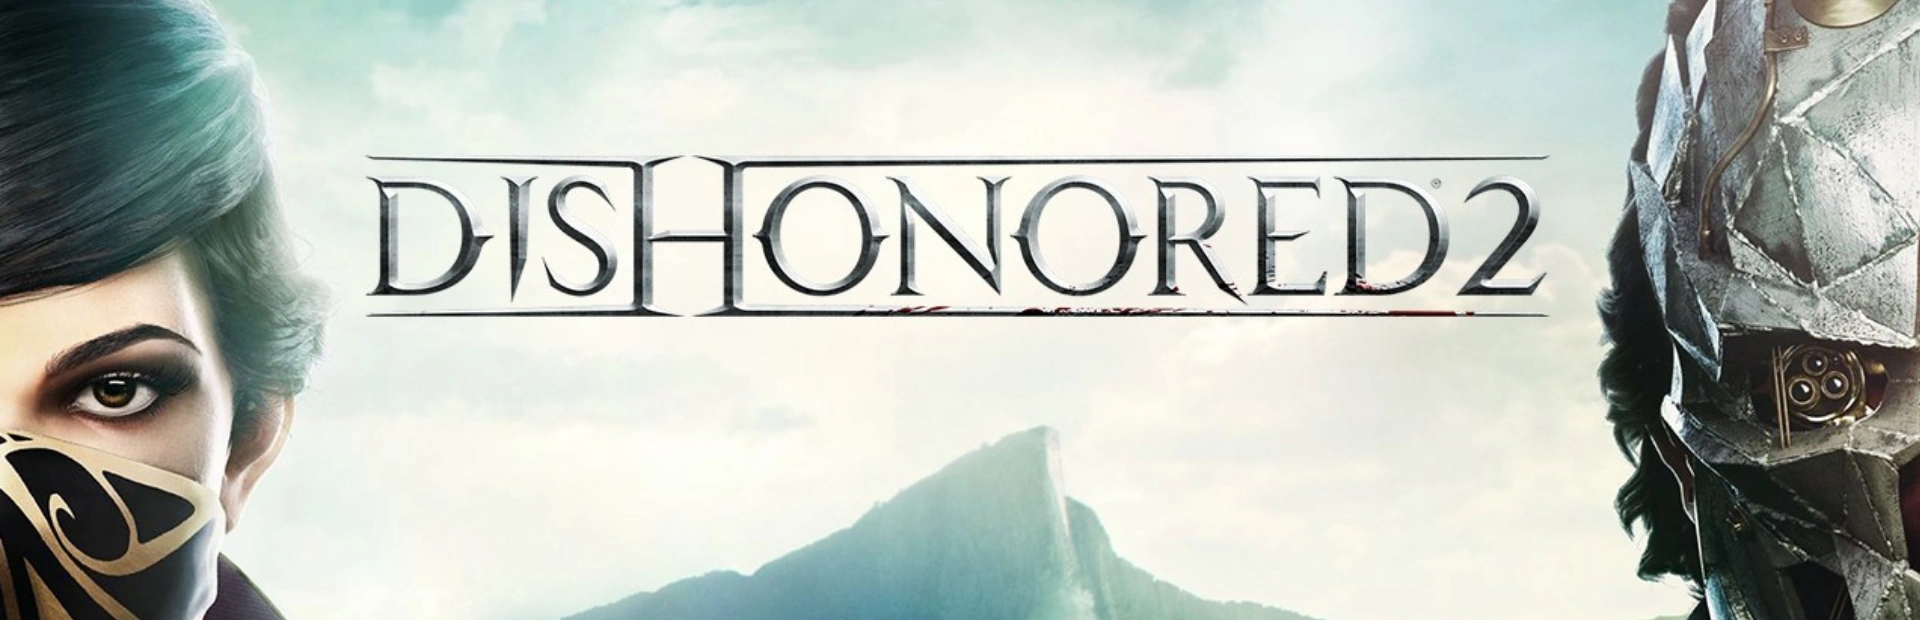 Dishonored.2.banner2